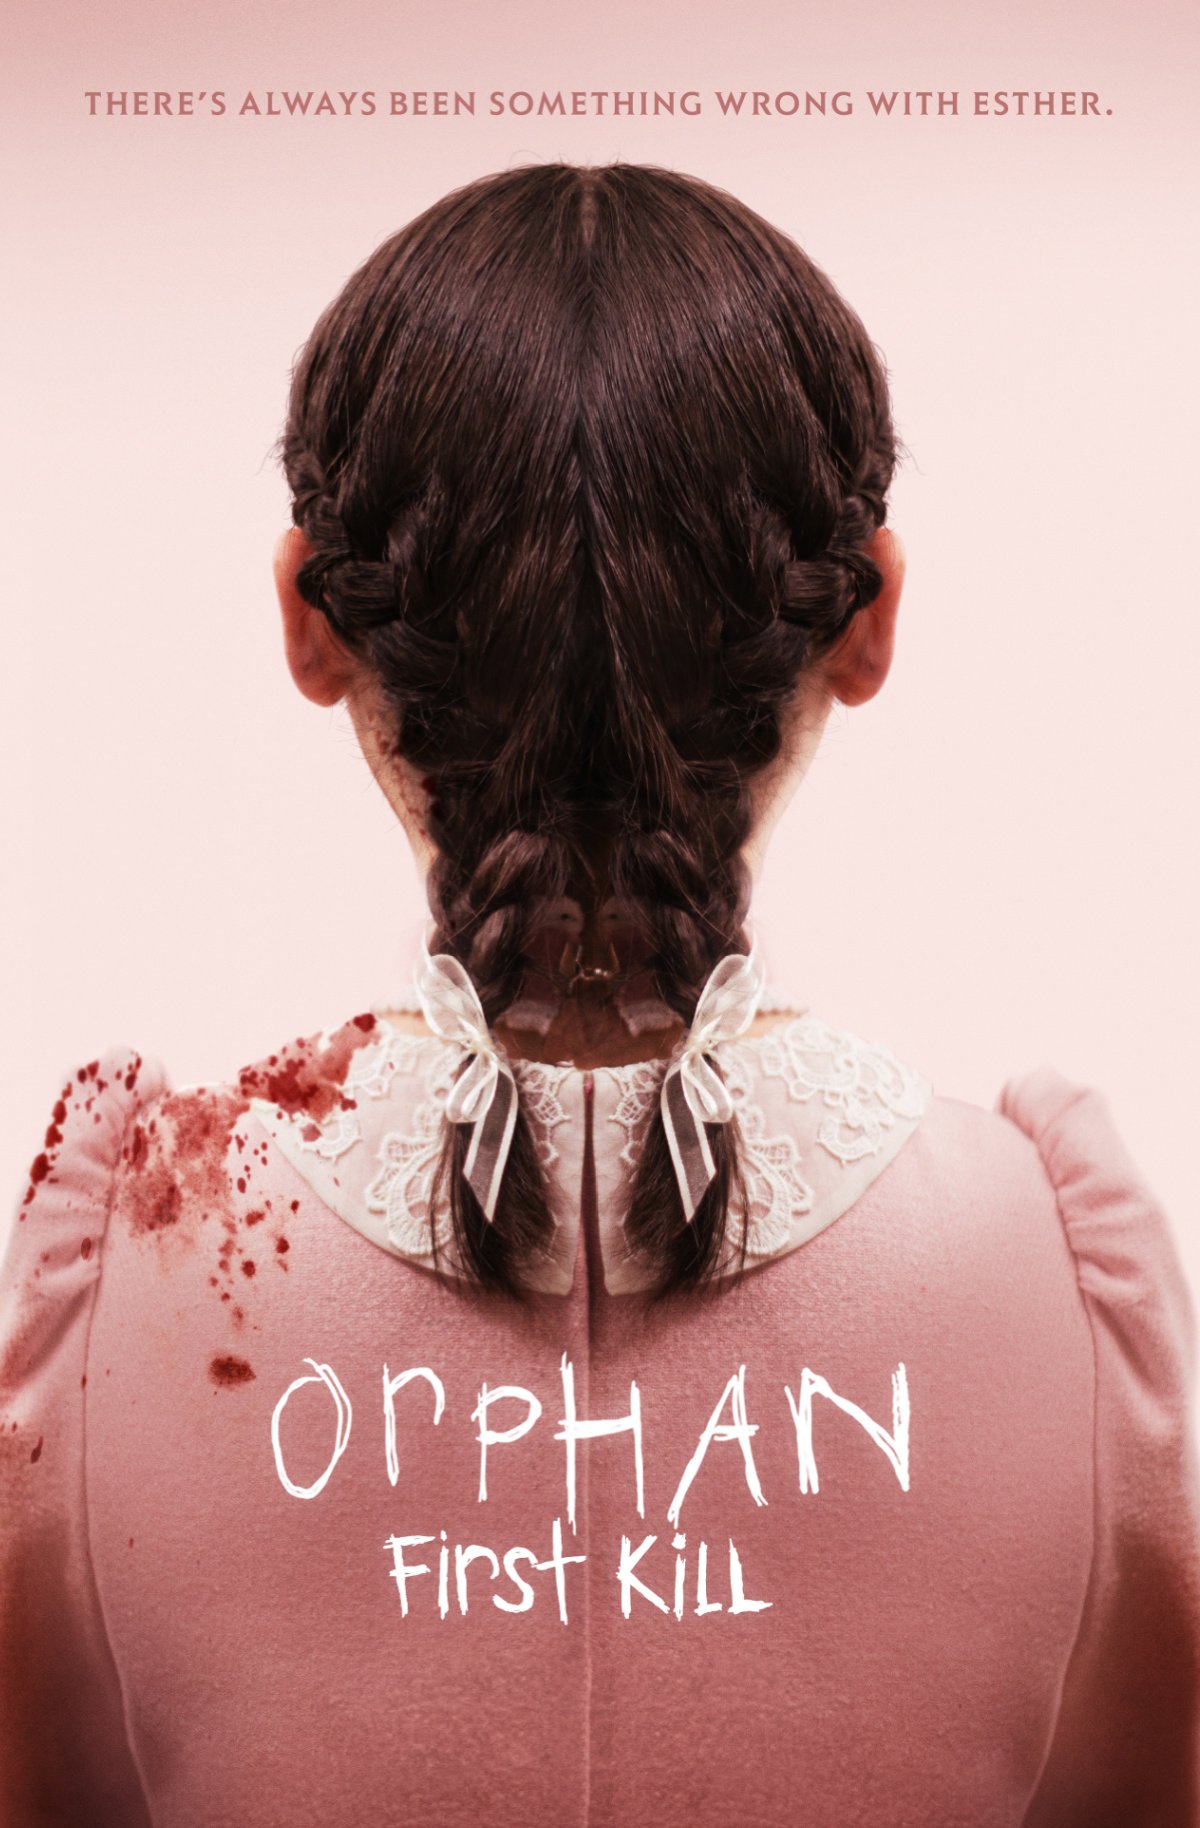 bobby dingman recommends Orphan Movie Free Online